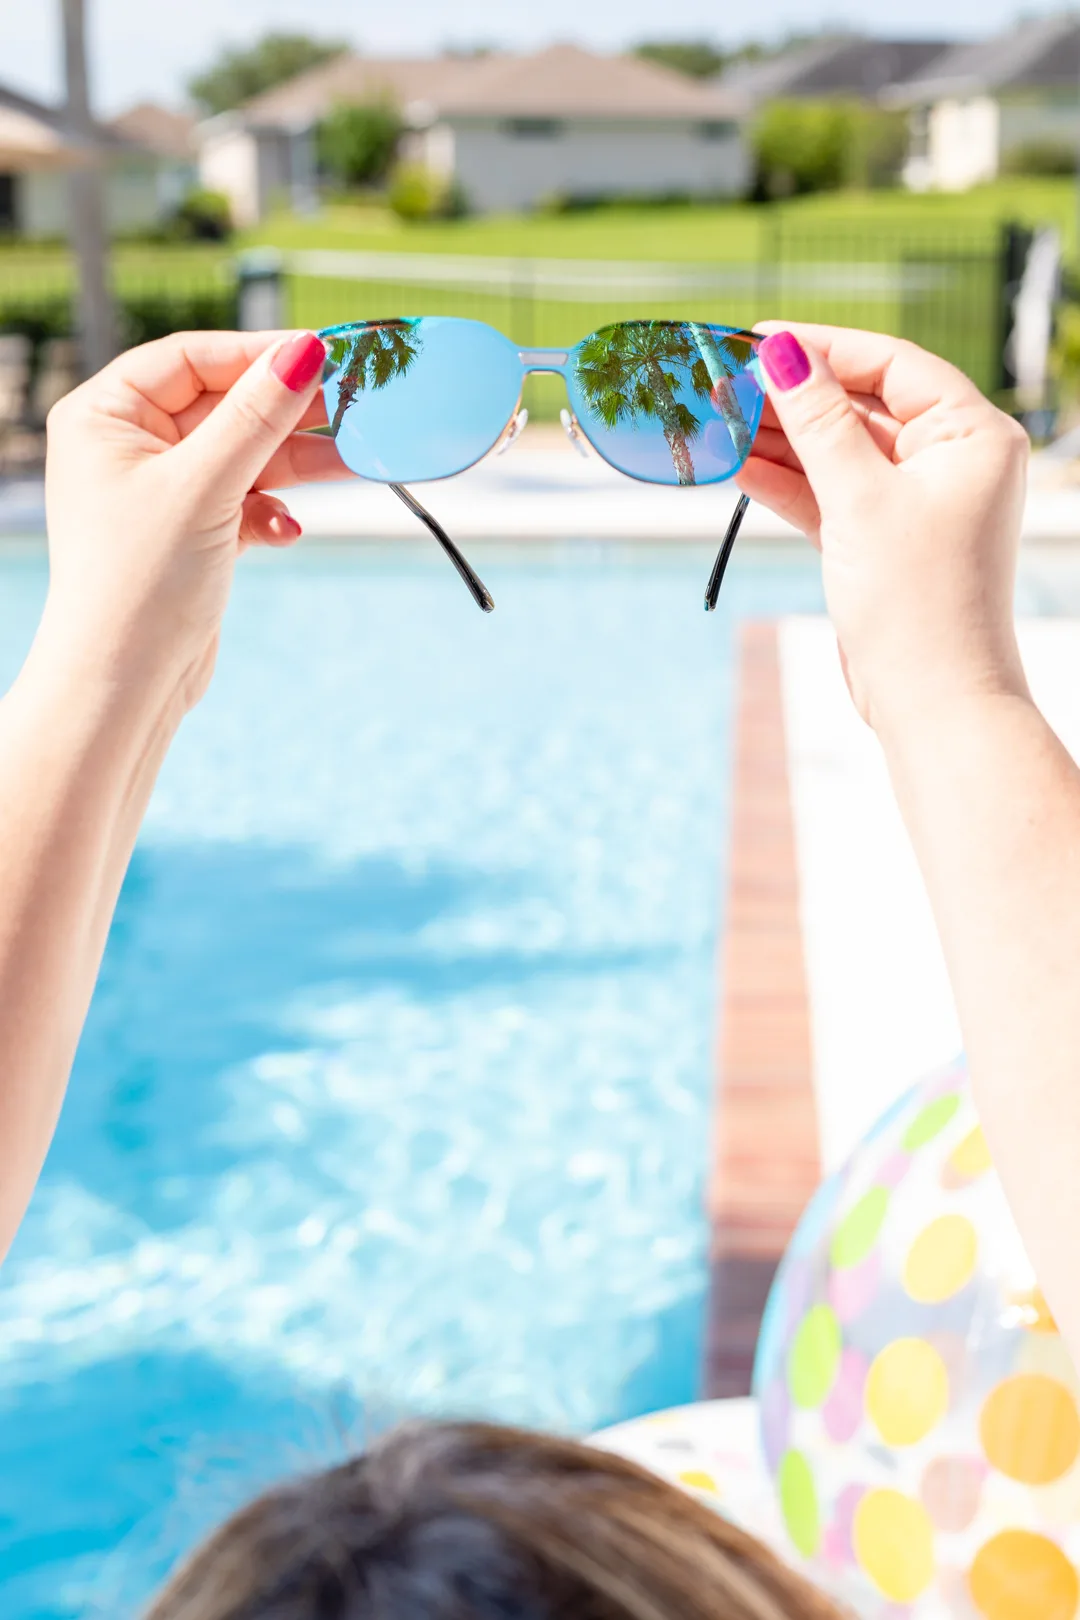 Pool Party Must Haves that are Bright and Colorful!